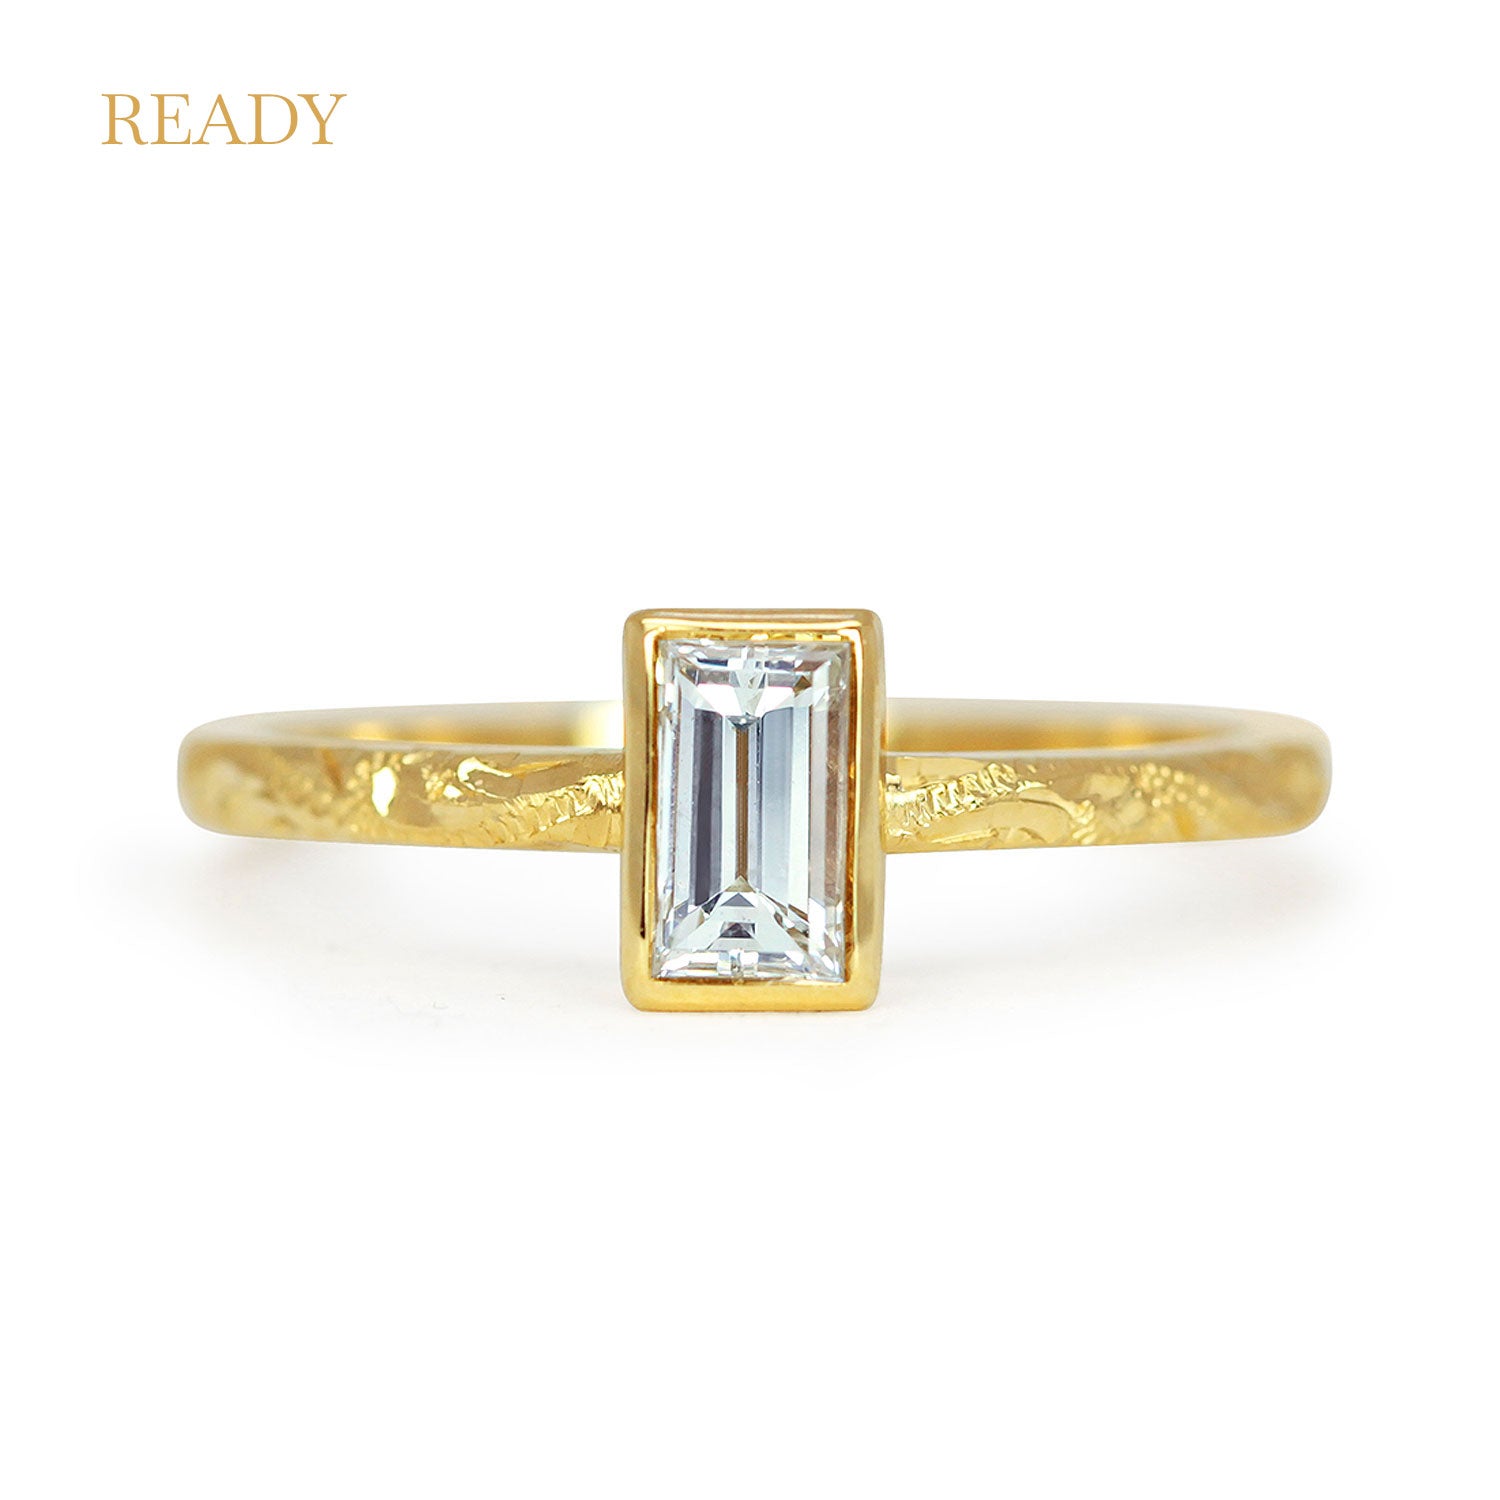 Lebrusan Studio Fancy Hera ready to wear engagement ring with a recycled baguette solitaire diamond in a rub-over setting; an 18ct recycled gold band is hand engraved with scrolls